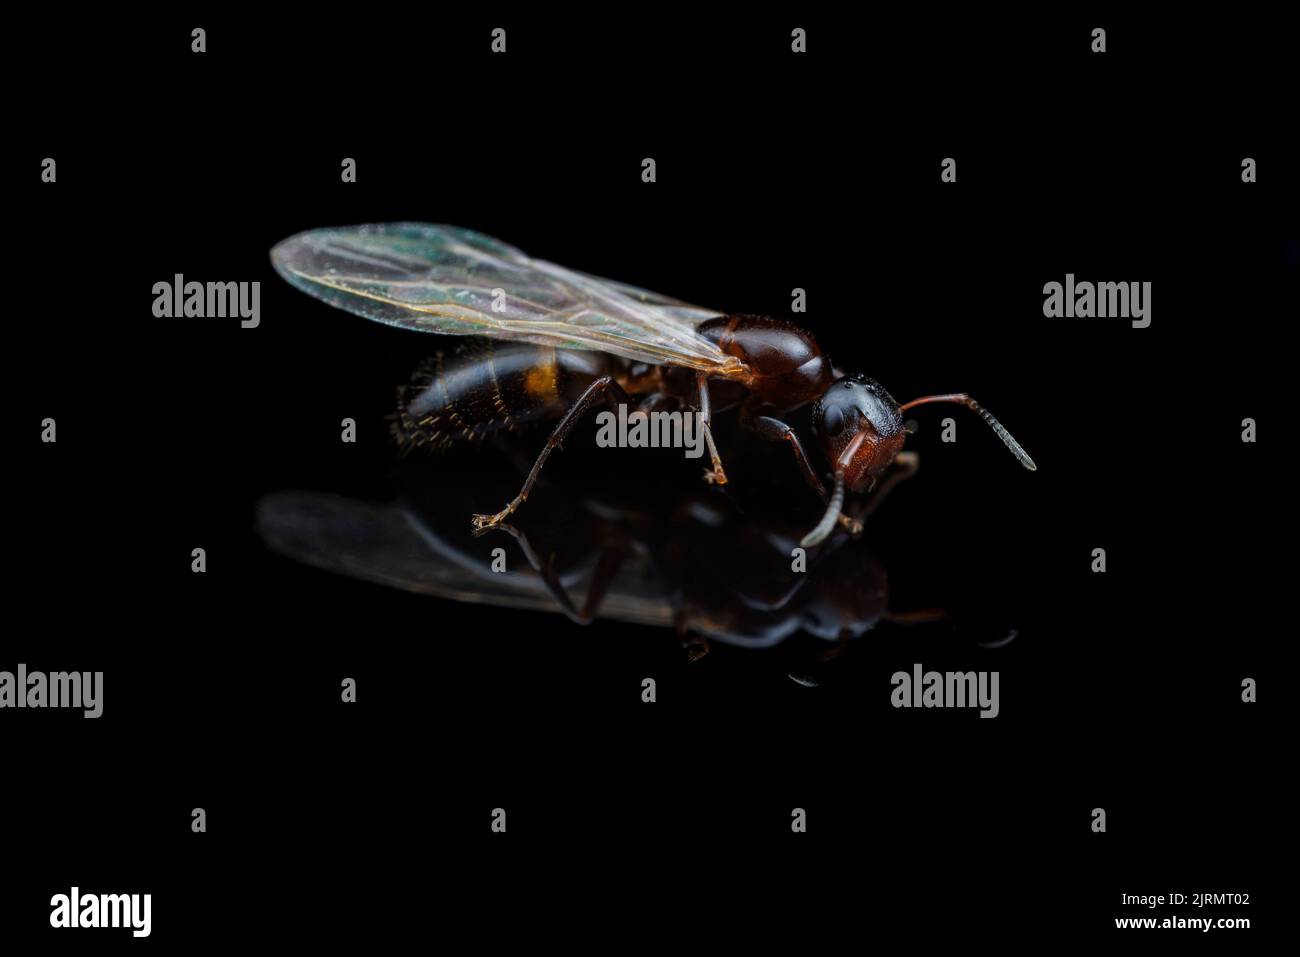 A Mississippi Gate-keeper Ant (Colobopsis mississippiensis) queen during a nuptial flight. Stock Photo